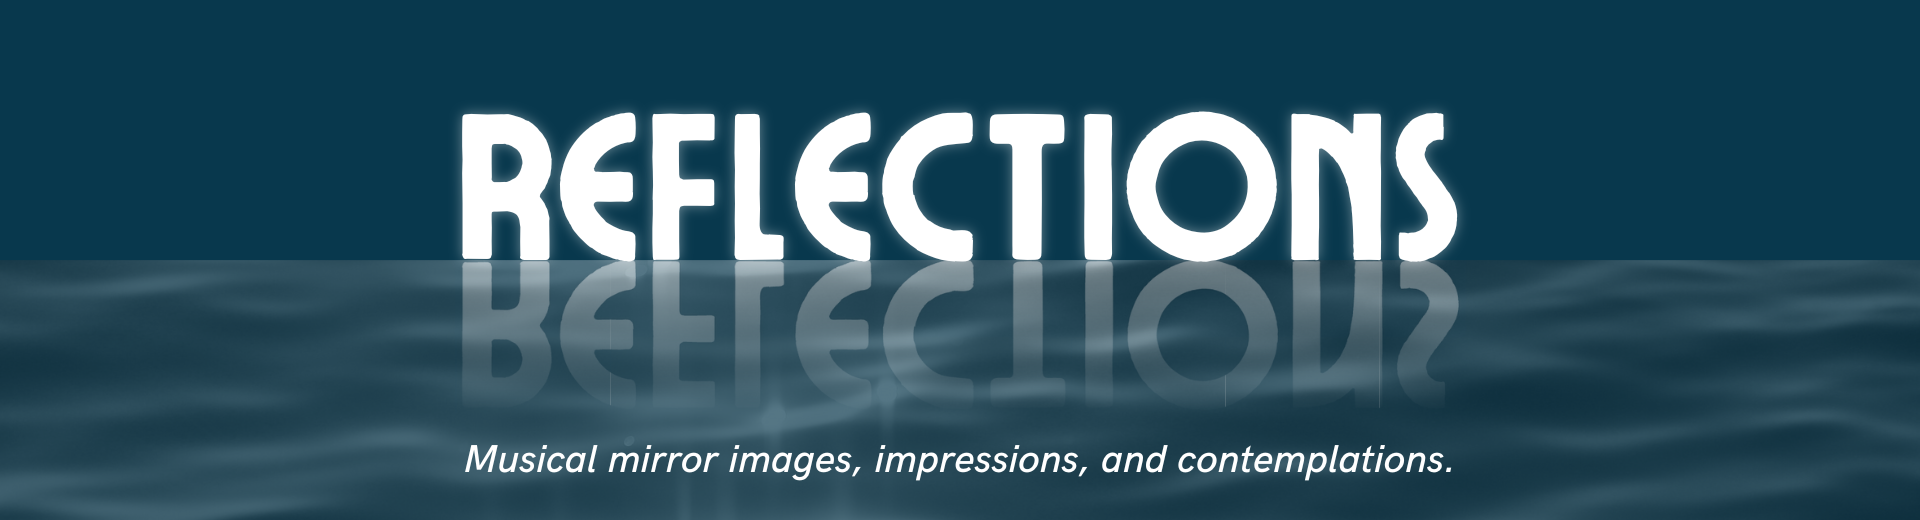 concert title and tagline: 'REFLECTIONS' — musical mirror images, impressions and contemplations.